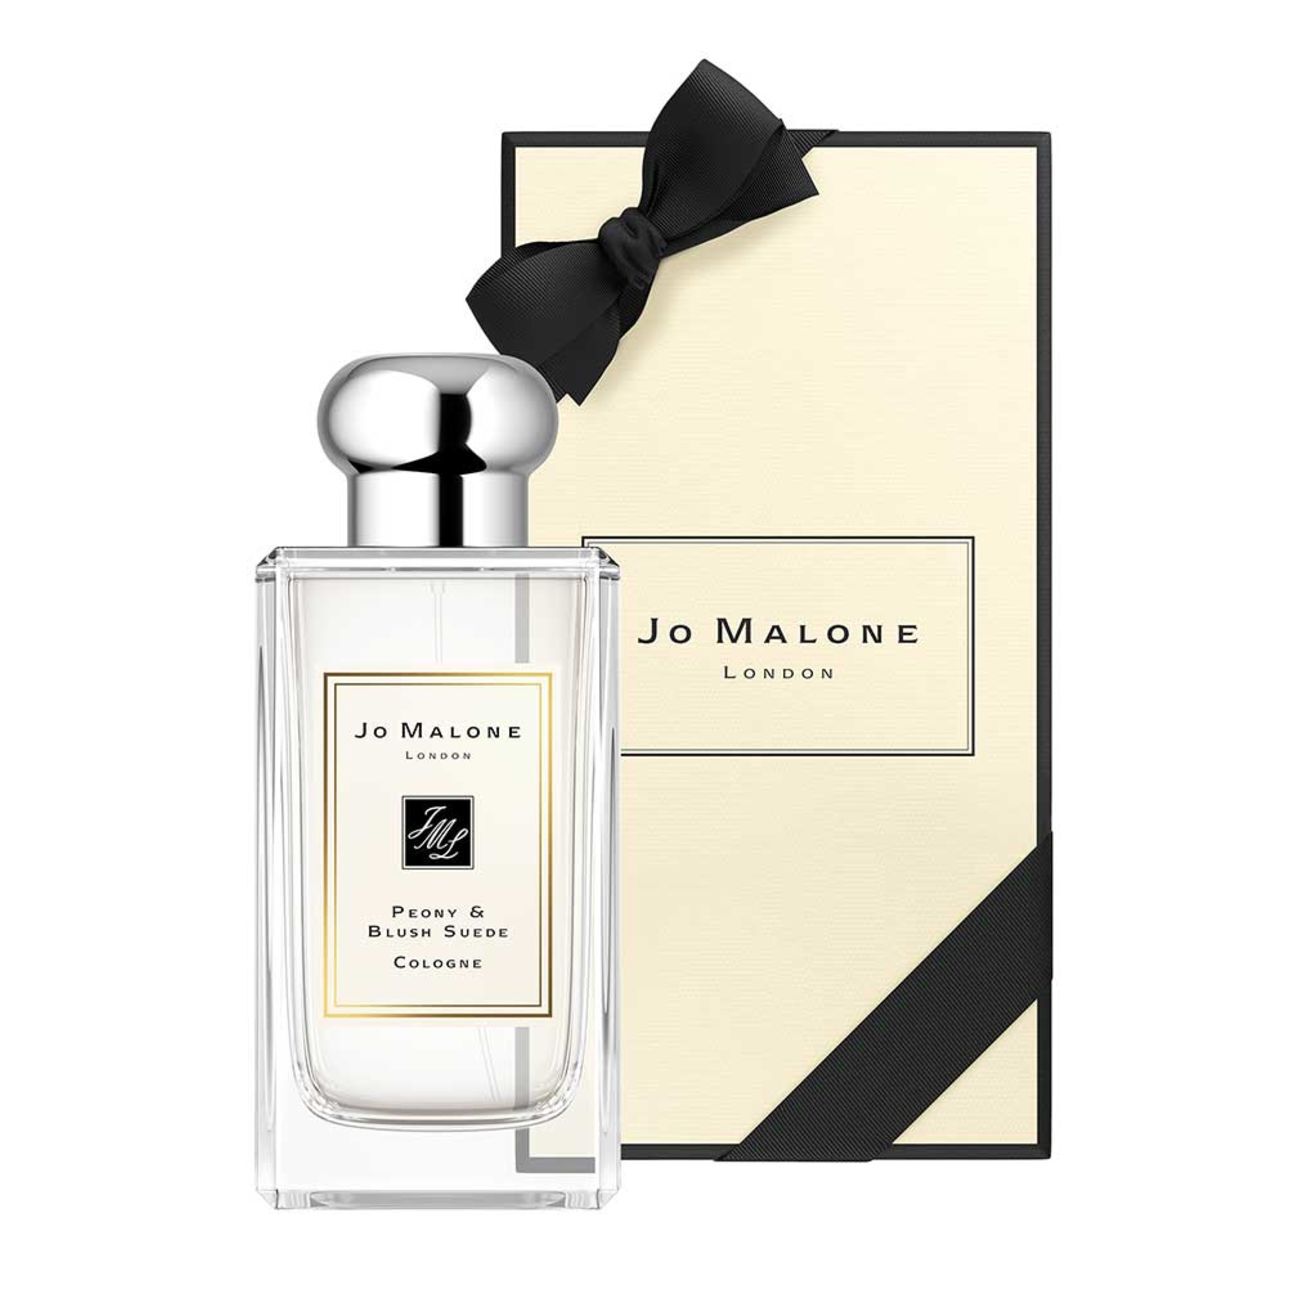 Jo Malone London Peony & Blush Suede Cologne Pre Pack Fragrance